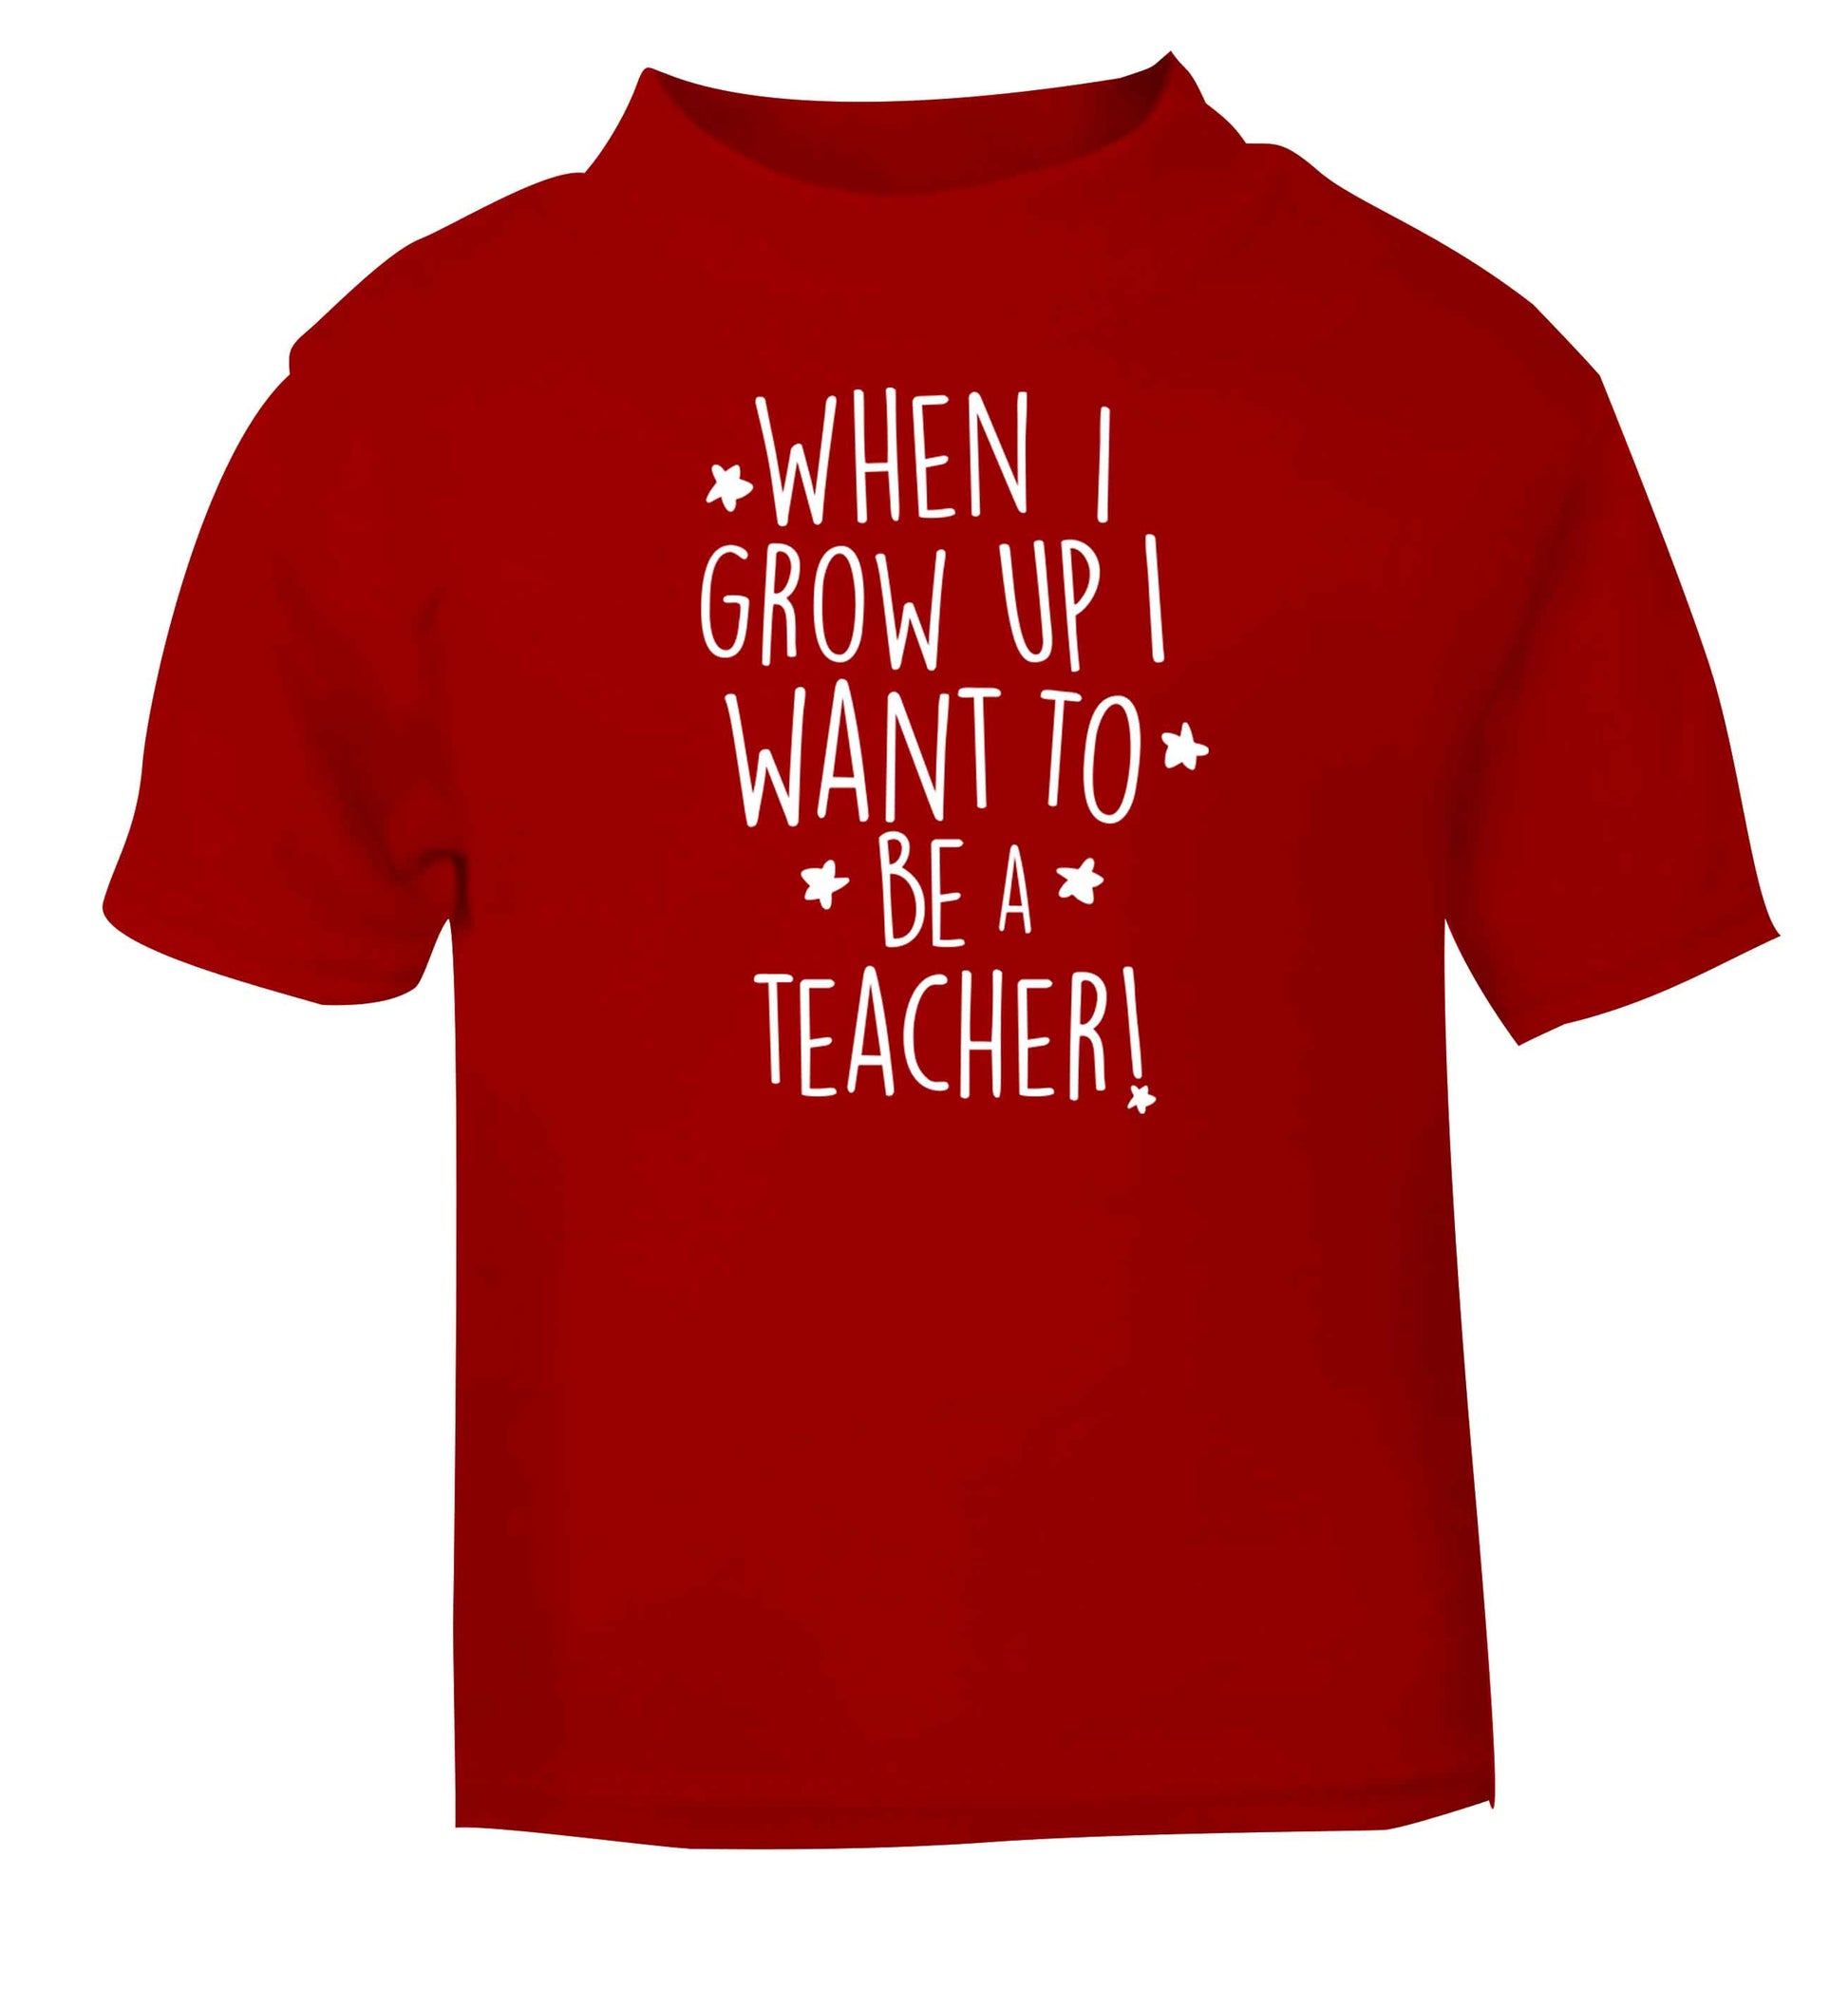 When I grow up I want to be a teacher red baby toddler Tshirt 2 Years